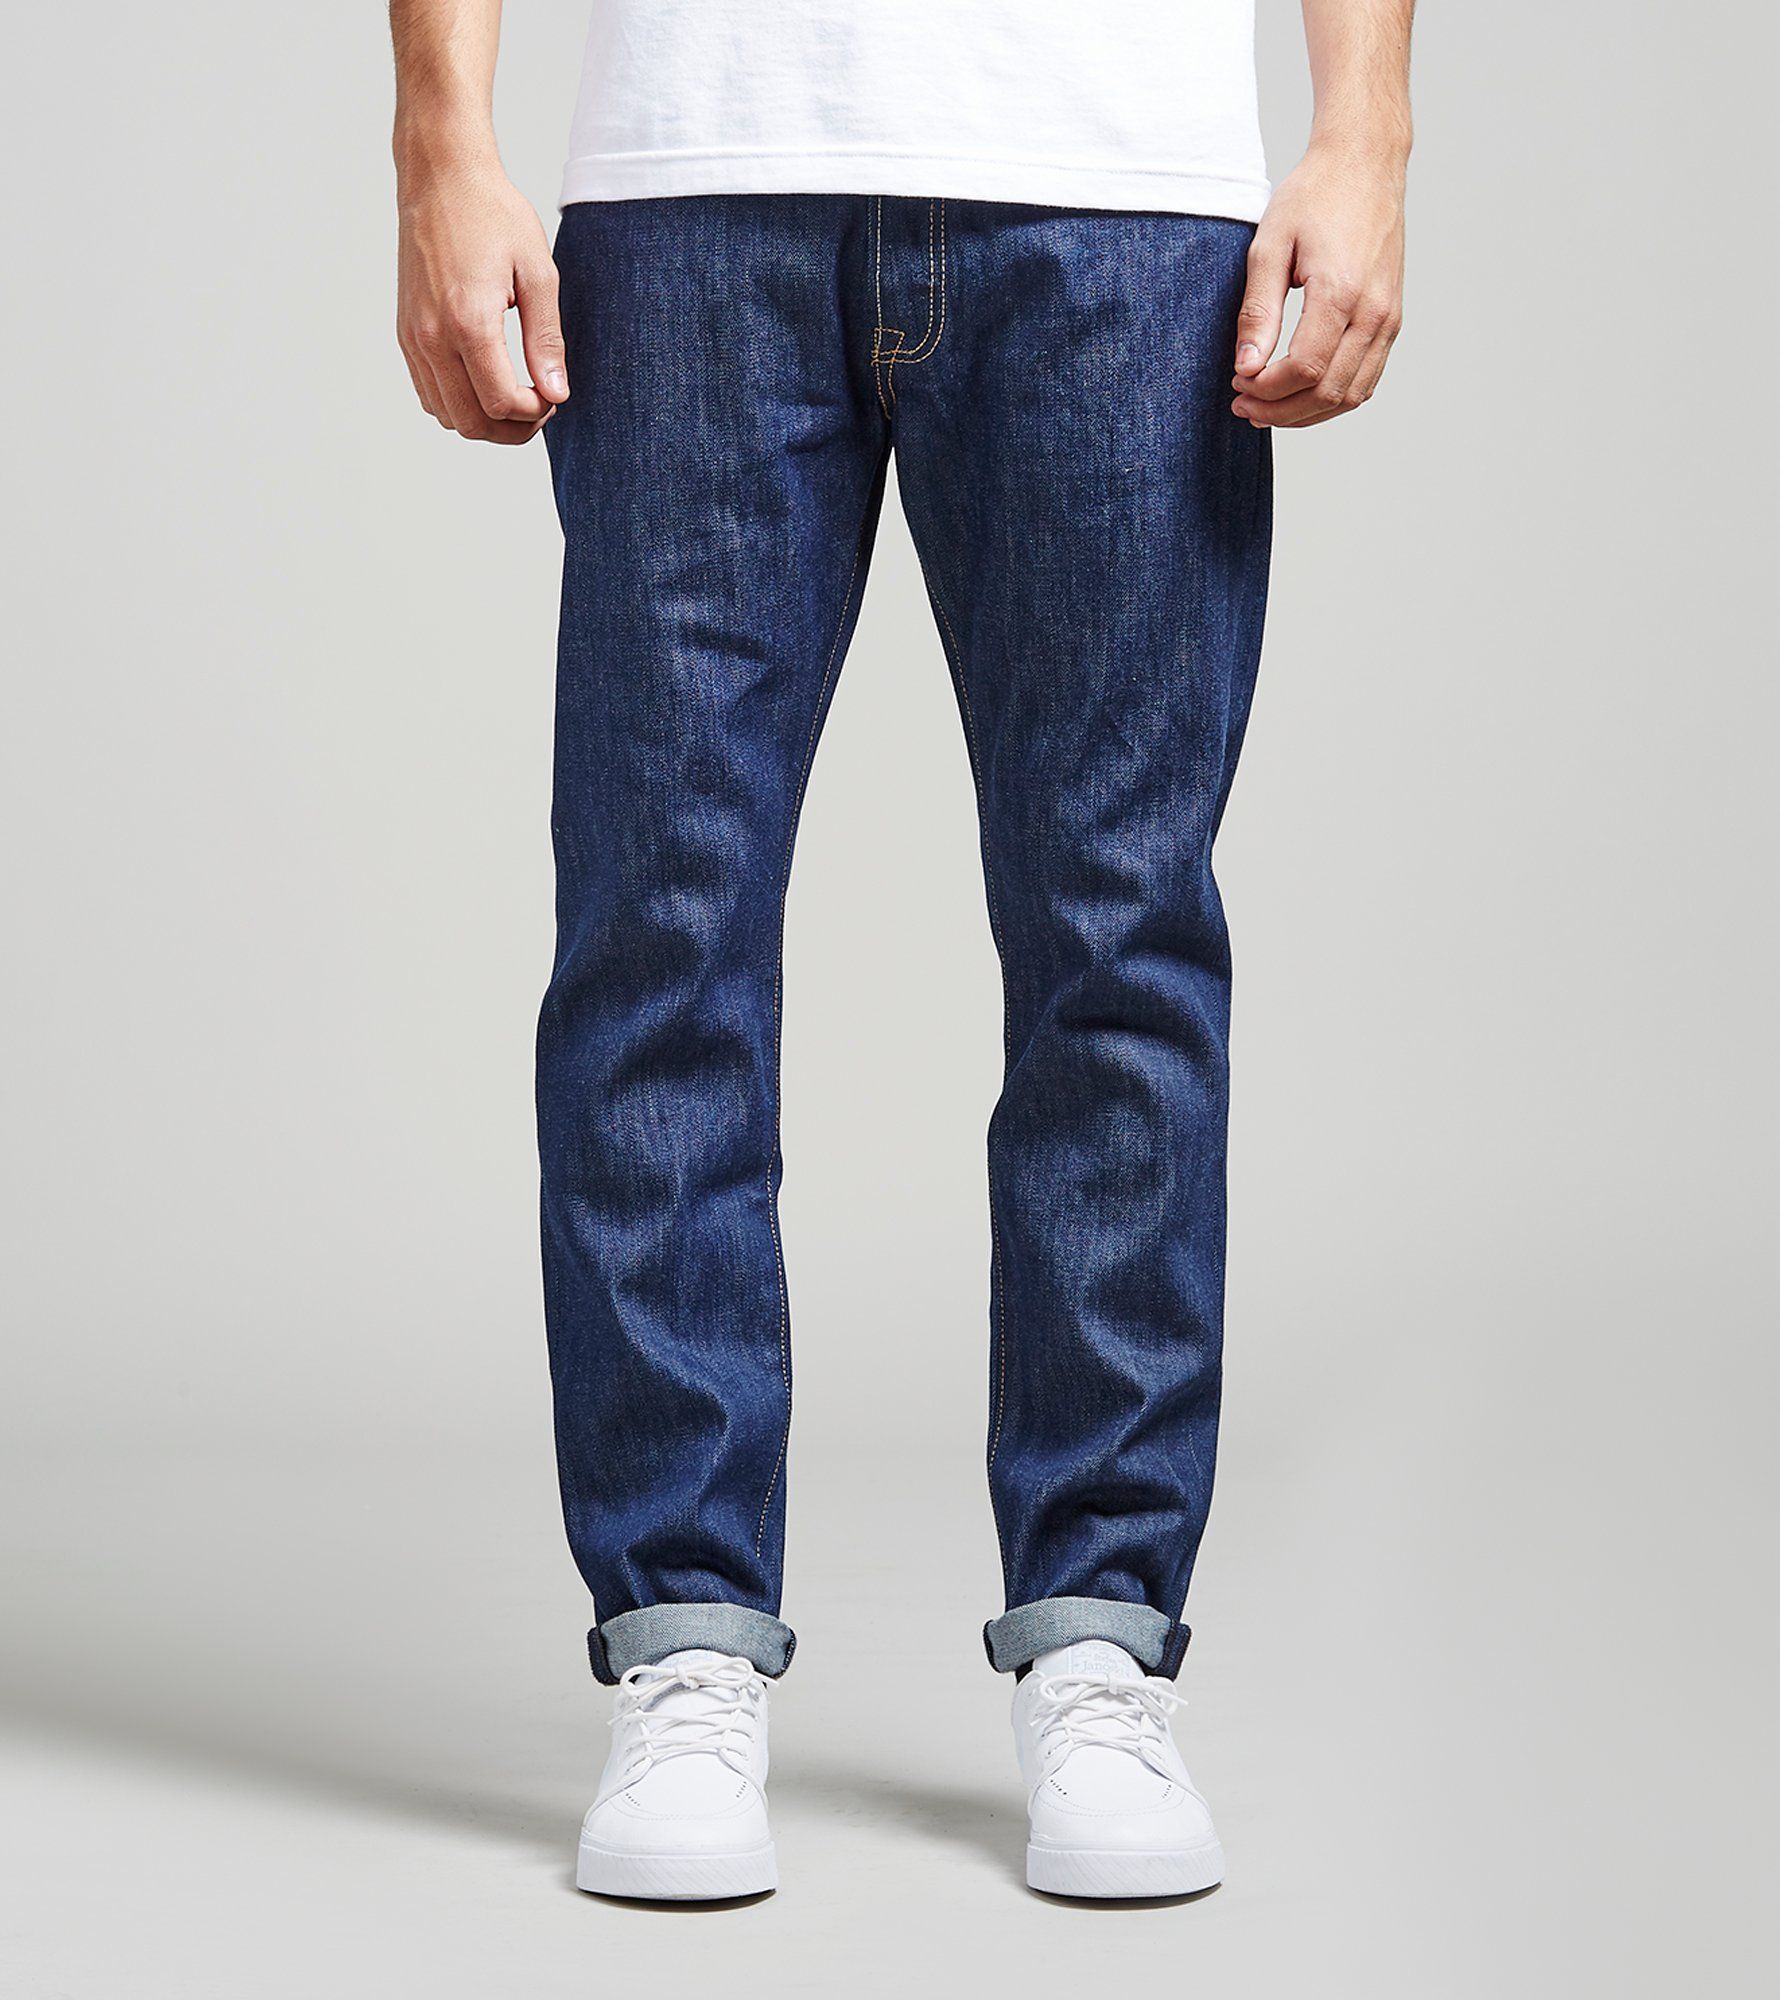 Levis 501 Customised & Tapered Jeans | Size?